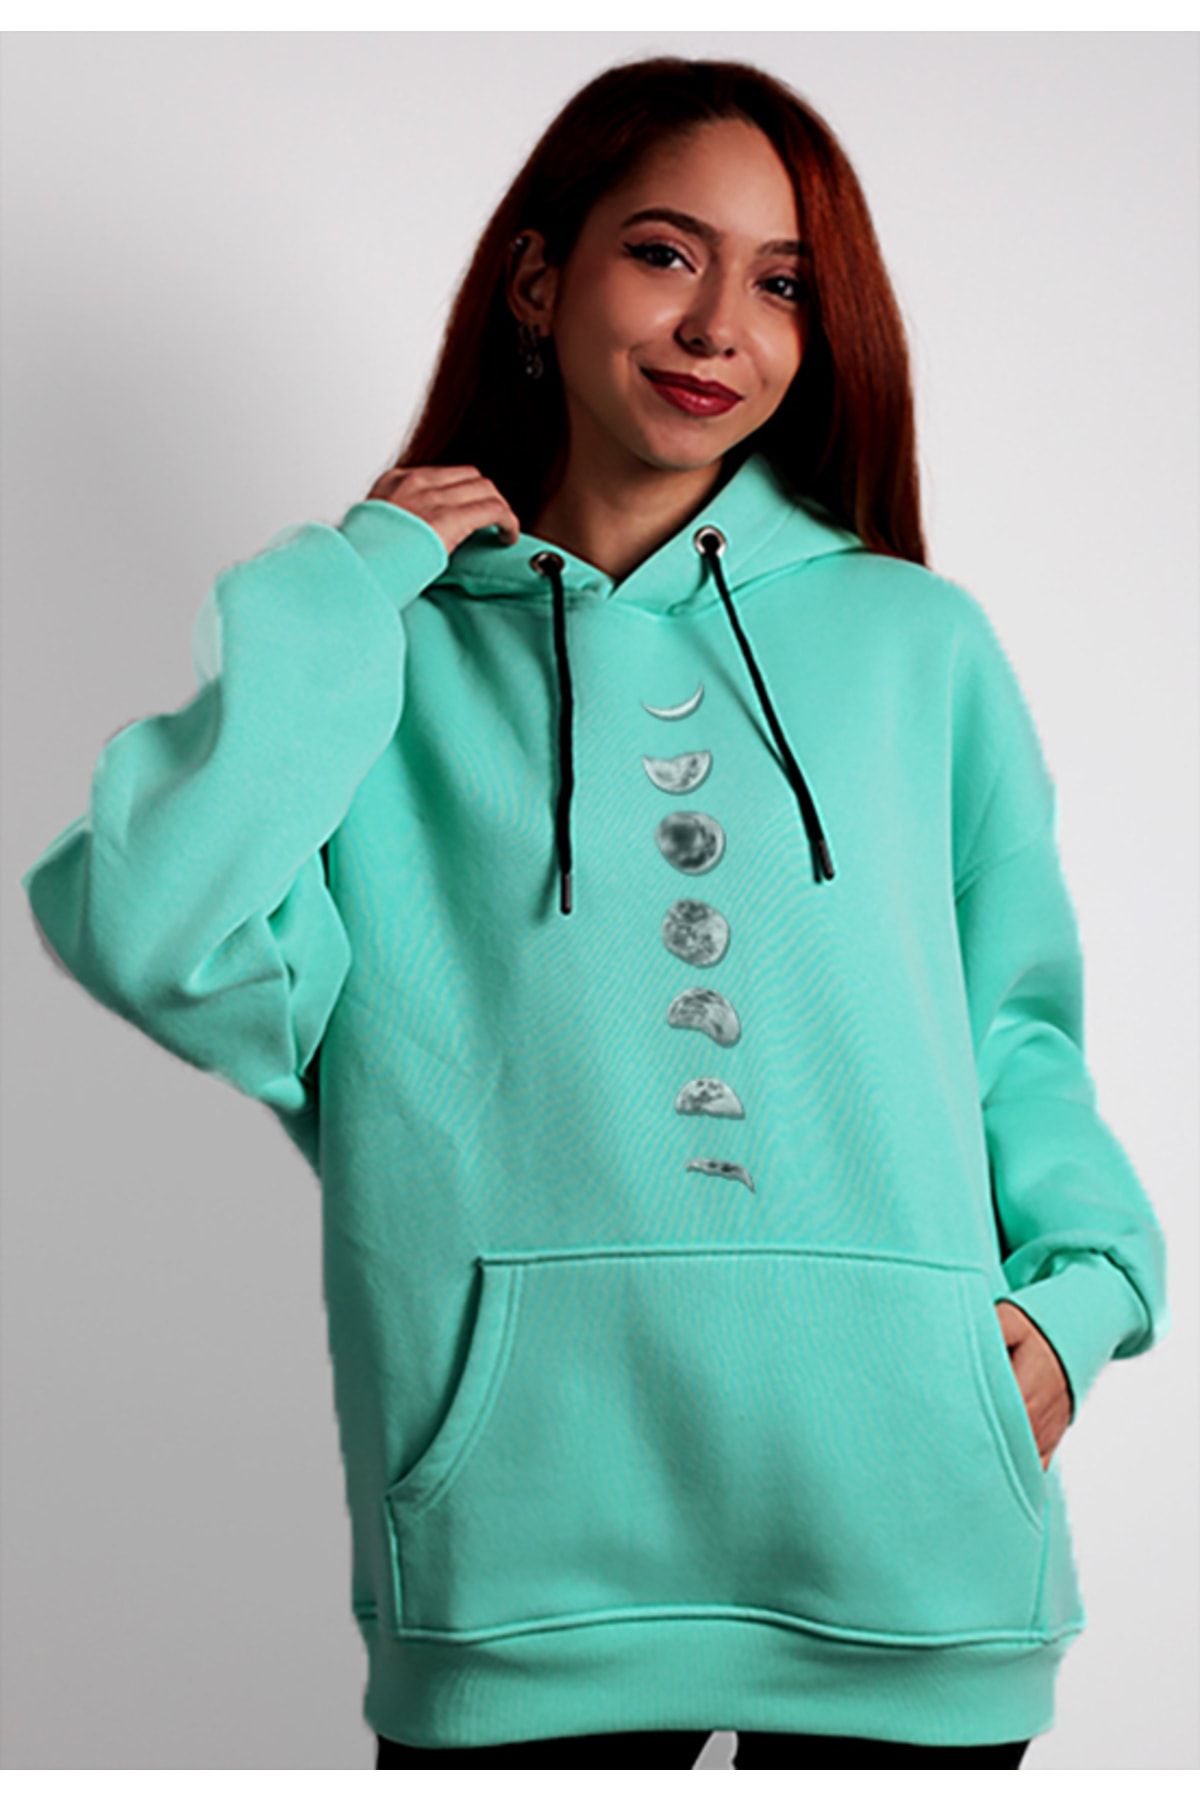 to COSMOS Unisex Oversize Hoodie Moon Themed Turquoise